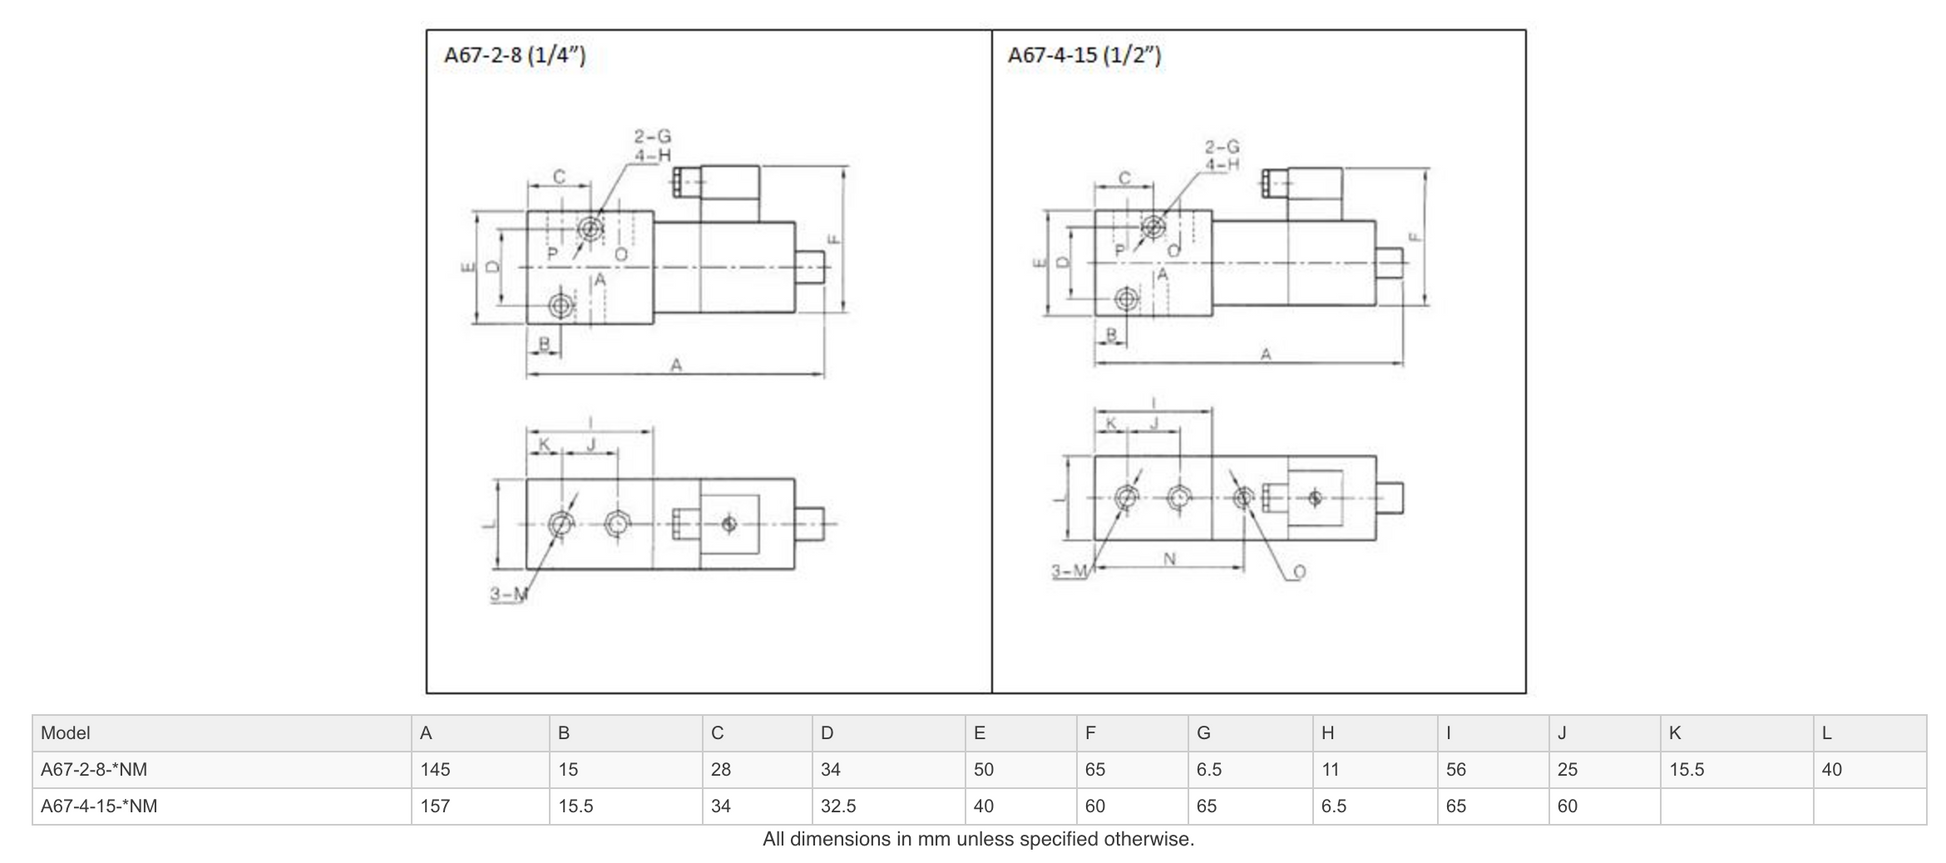 Dimensions - GO Solenoid Valve 1/4" and 1/2" A67 Aluminium High Pressure 3 Way 2 Position Normally Open